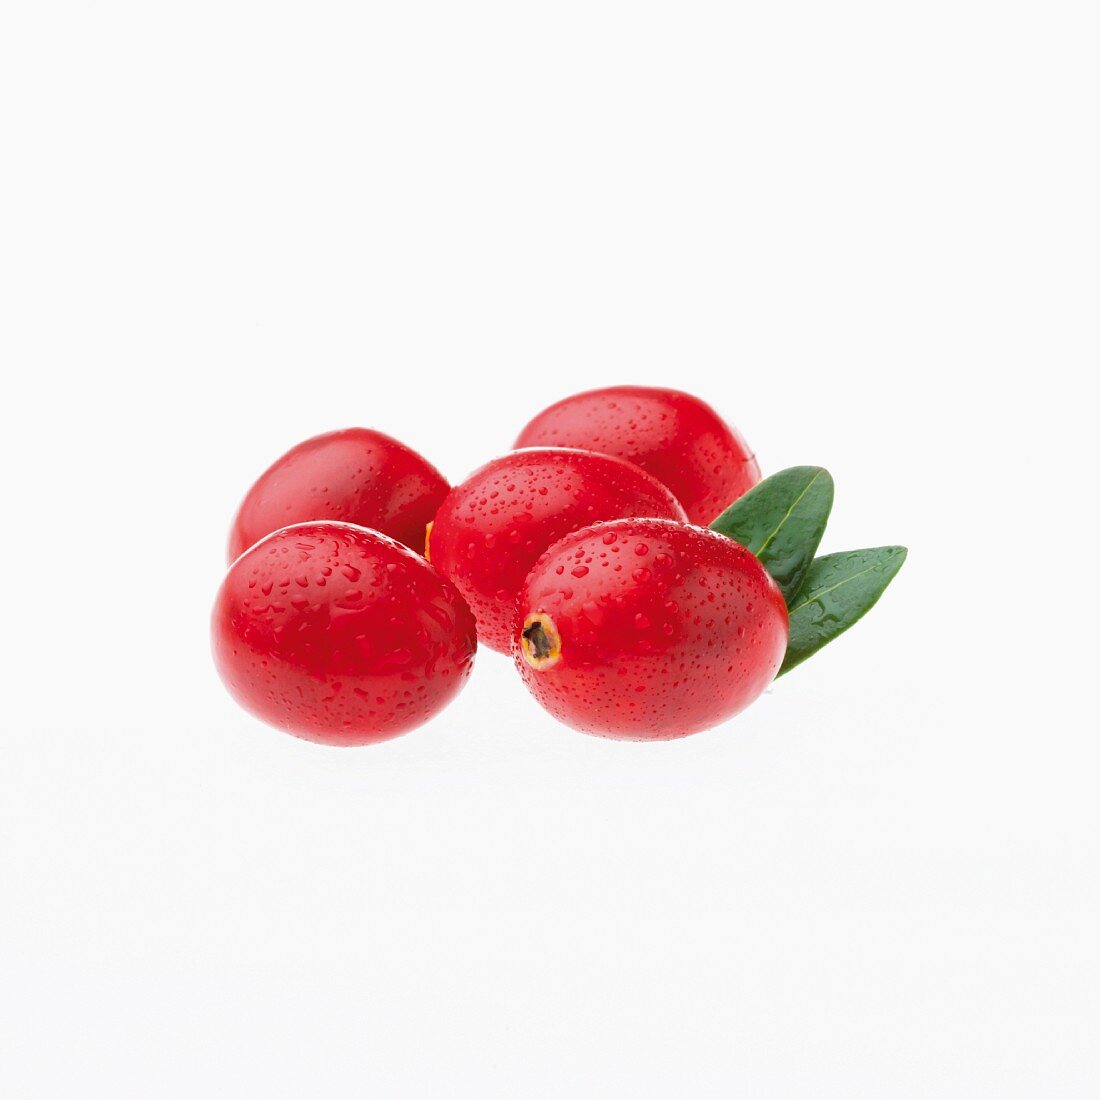 Five cranberries with water droplets